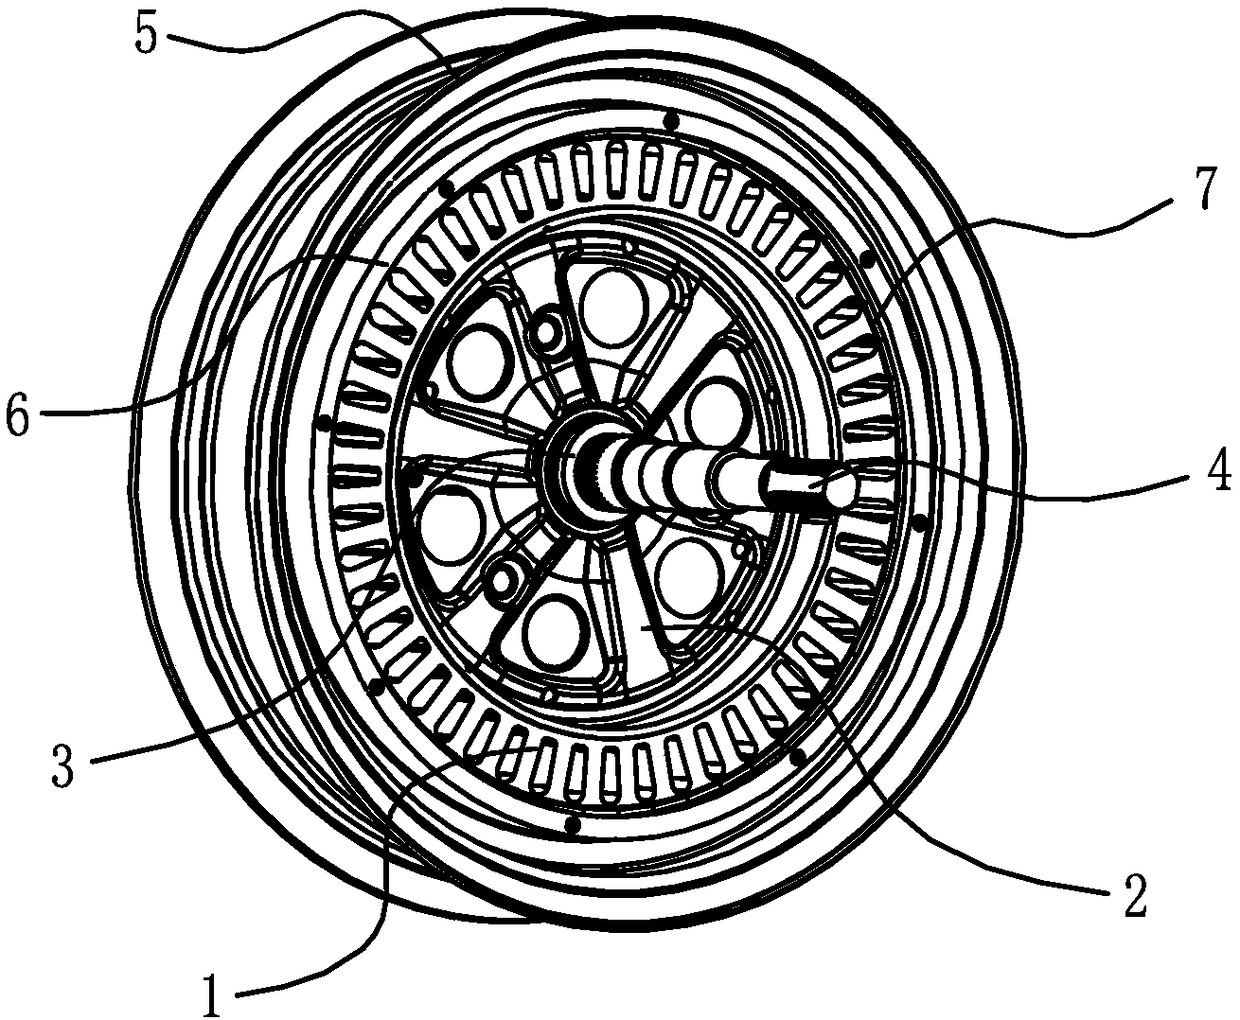 A stator for an electric wheel hub motor and a motor containing the stator